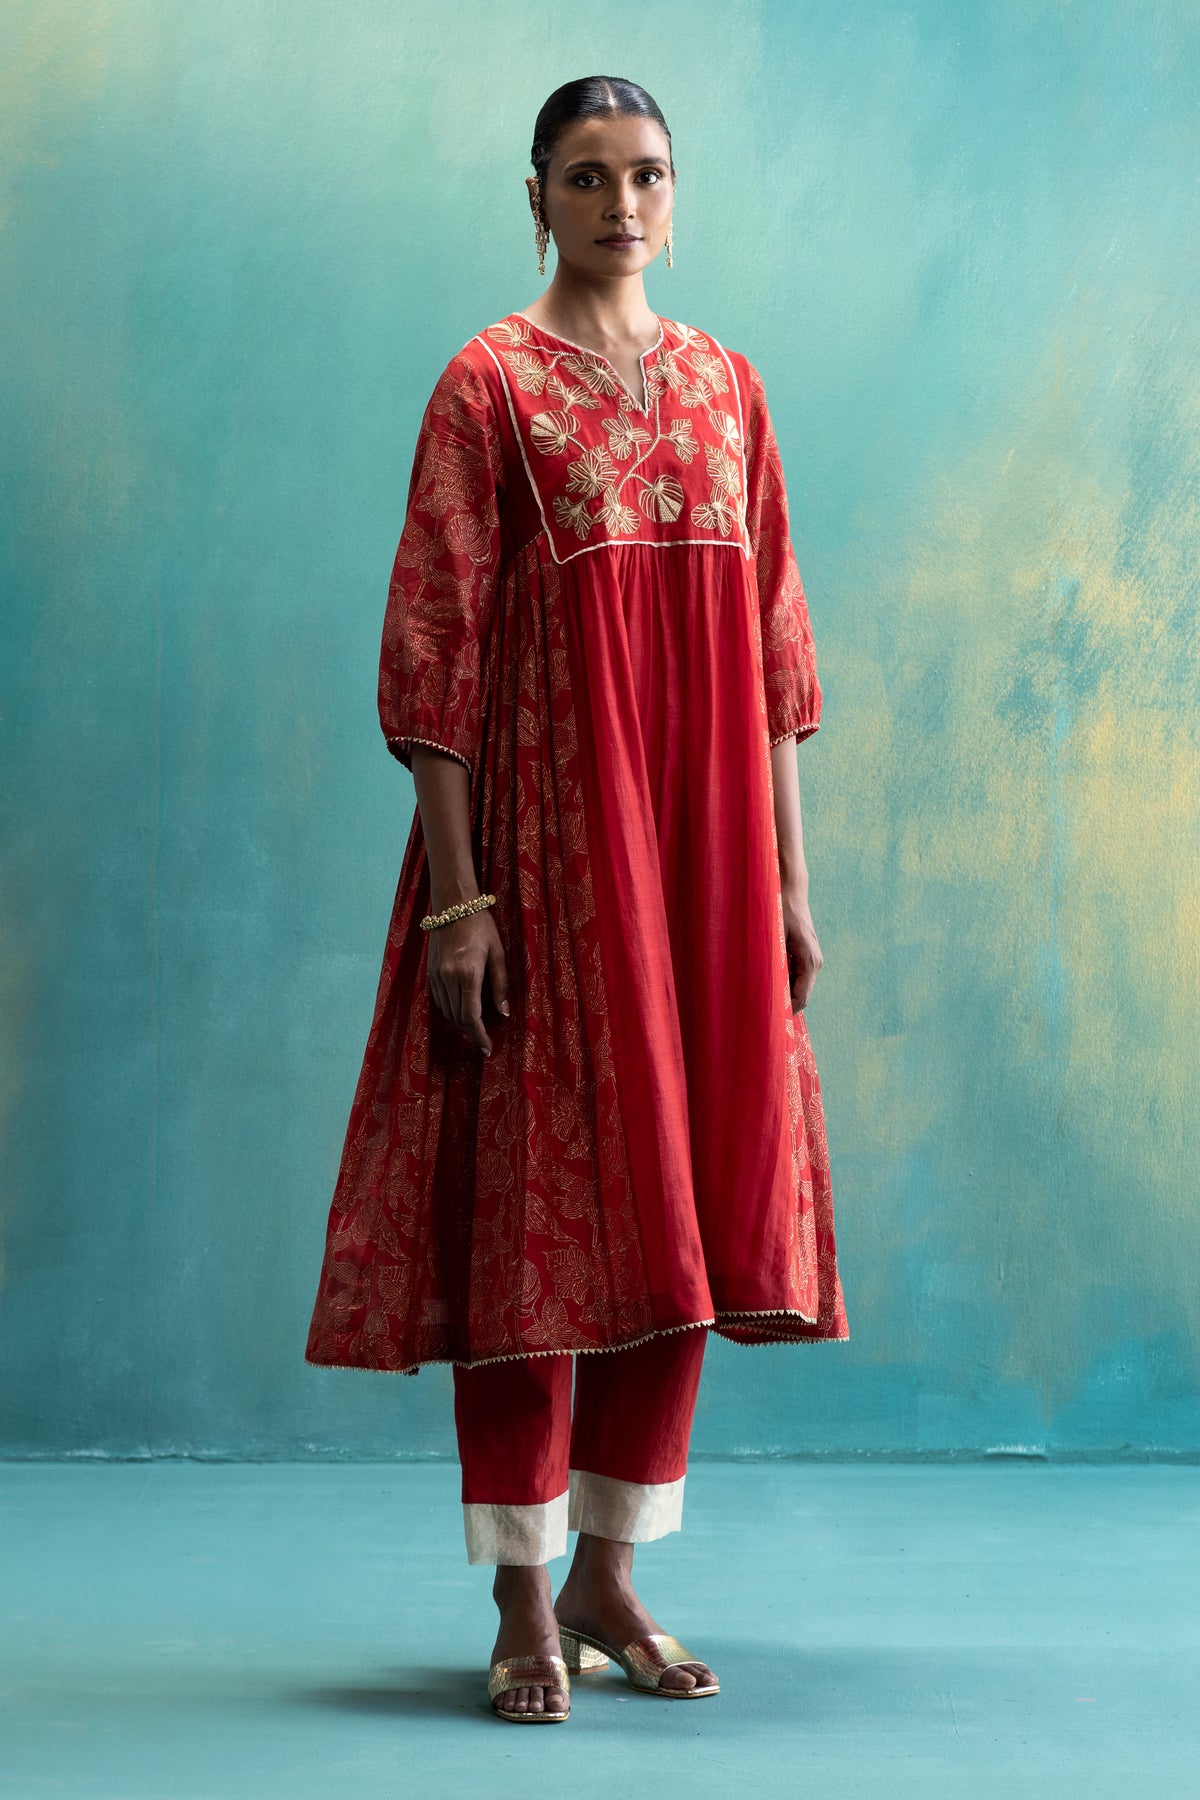 DIL-KASH RED CHANDERI FRONT AND BACK FLORAL EMBROIDERY WITH SIDE PLEATS AND GOLD BLOCK PRINT KURTA